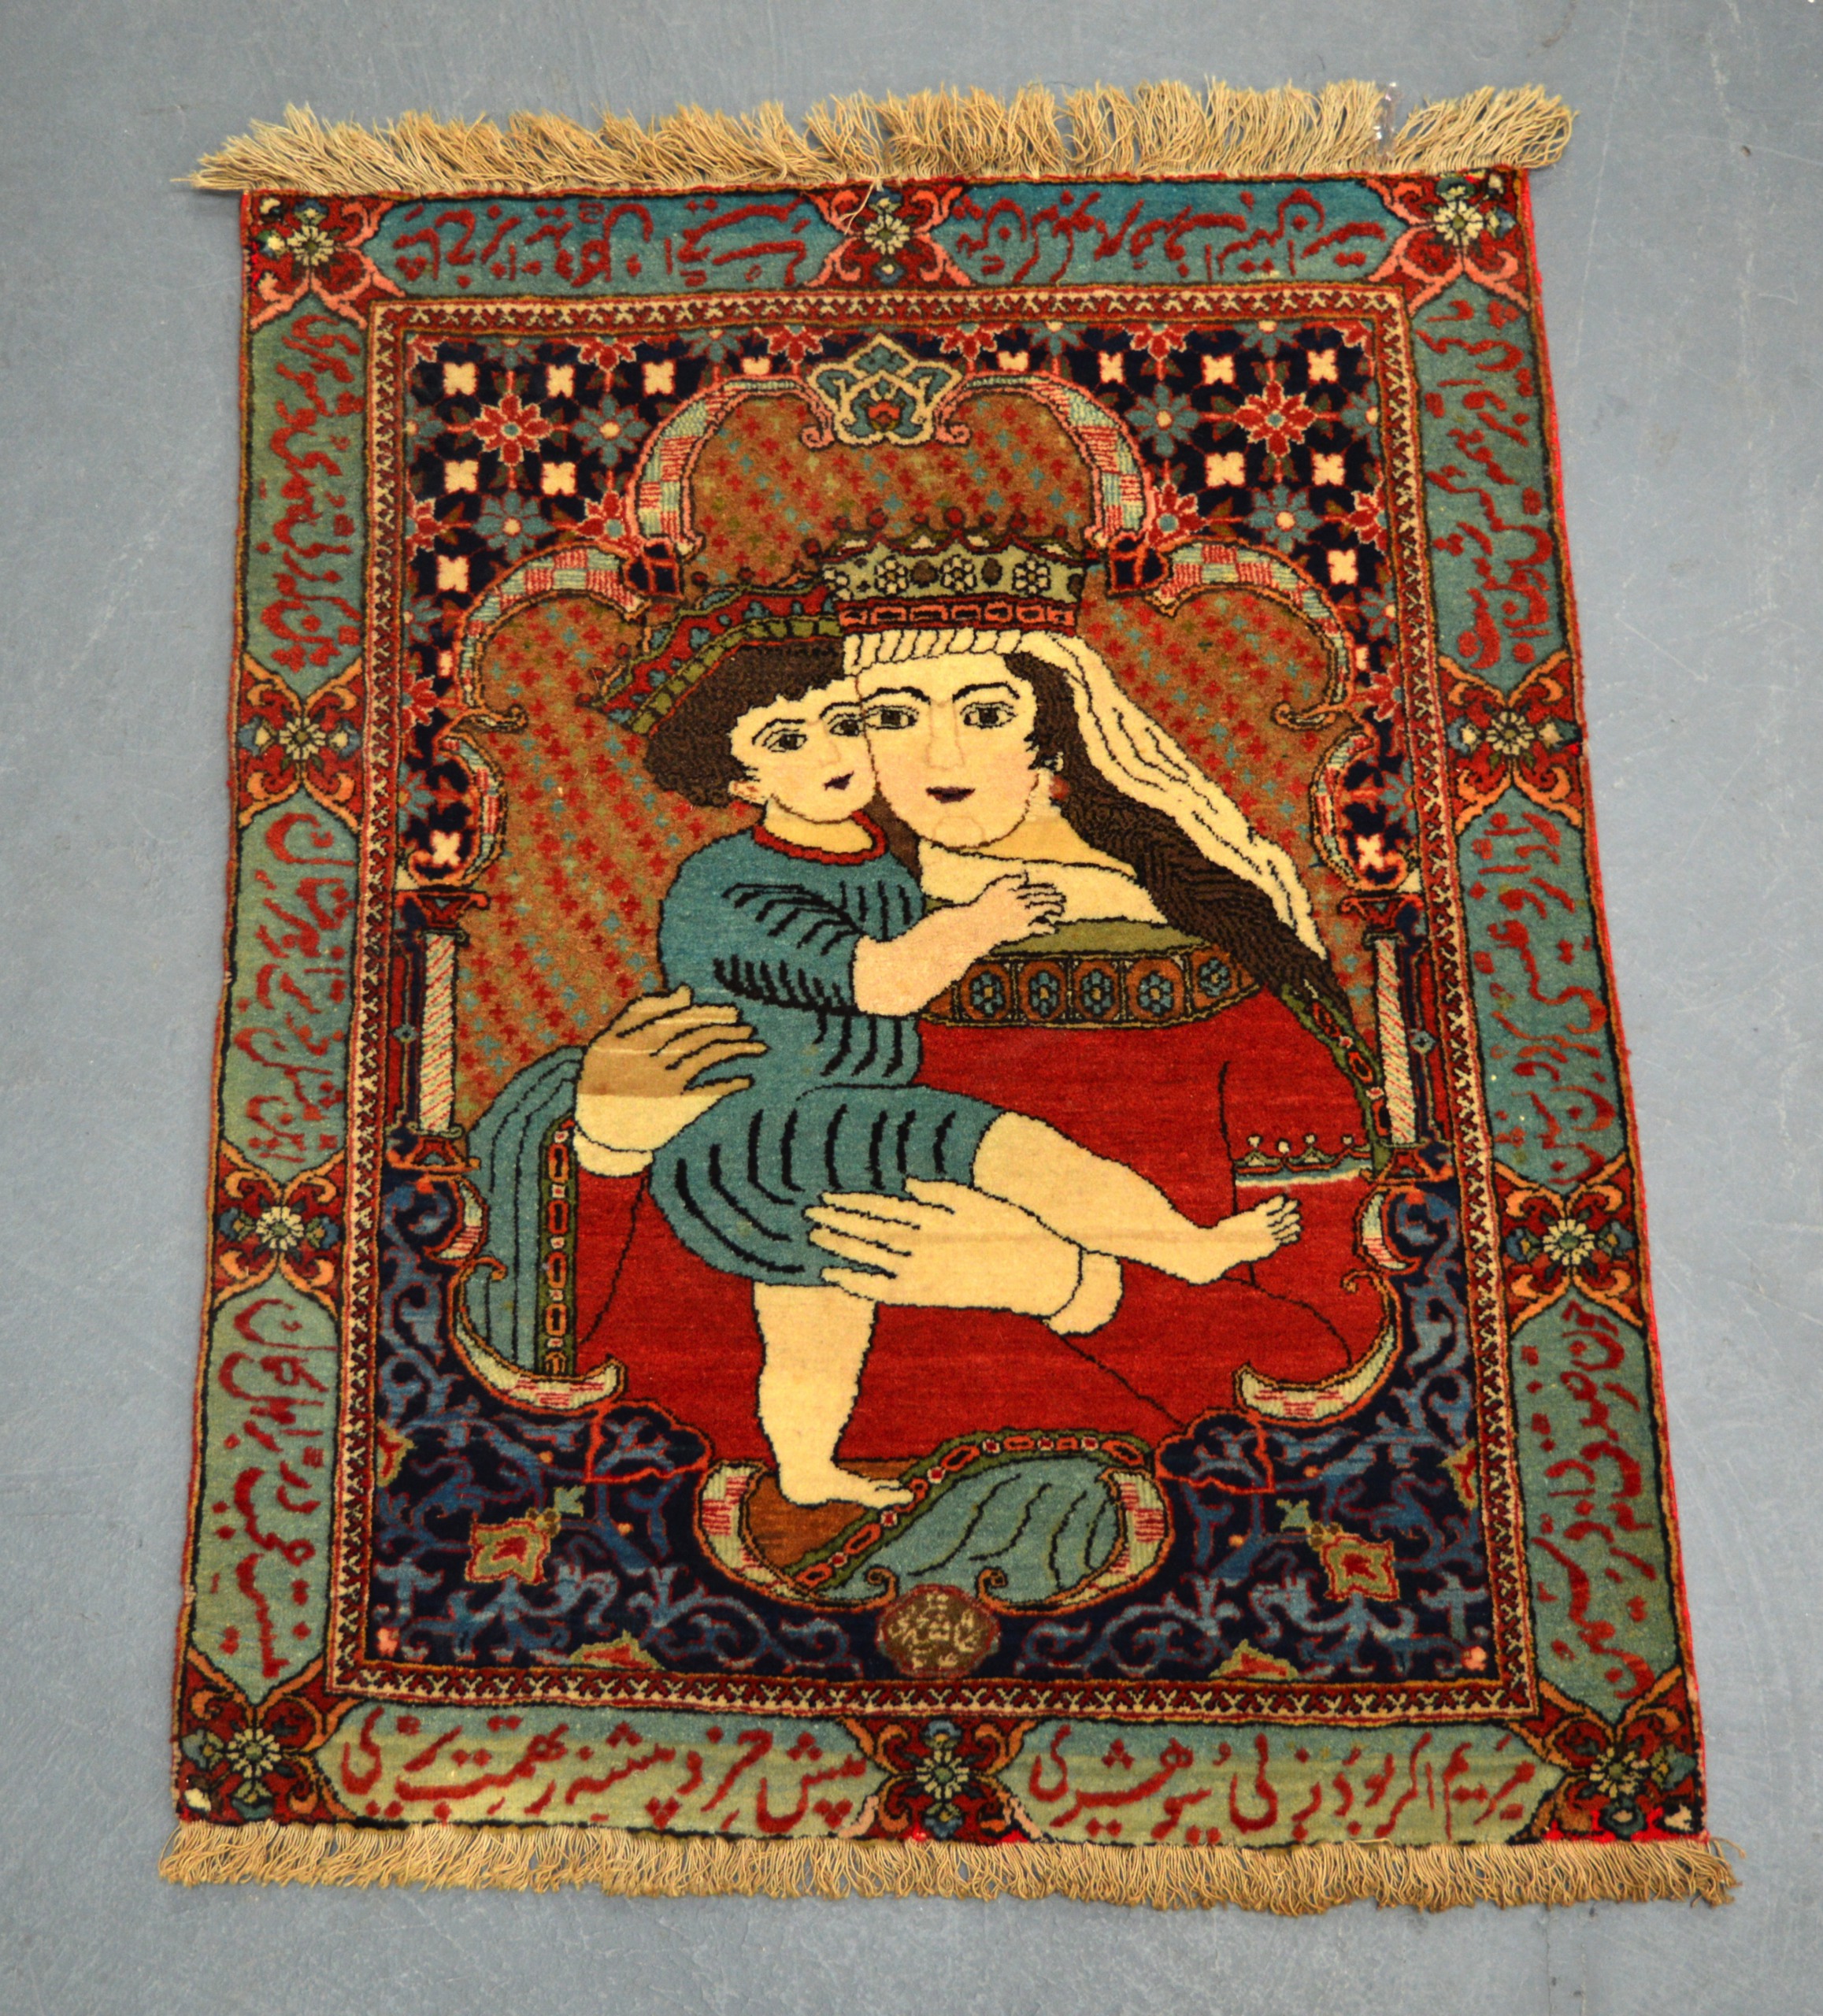 AN UNUSUAL MADONNA AND CHILD SMALL RUG within a border of Islamic symbols. 2Ft 5ins x 1ft 11ins.